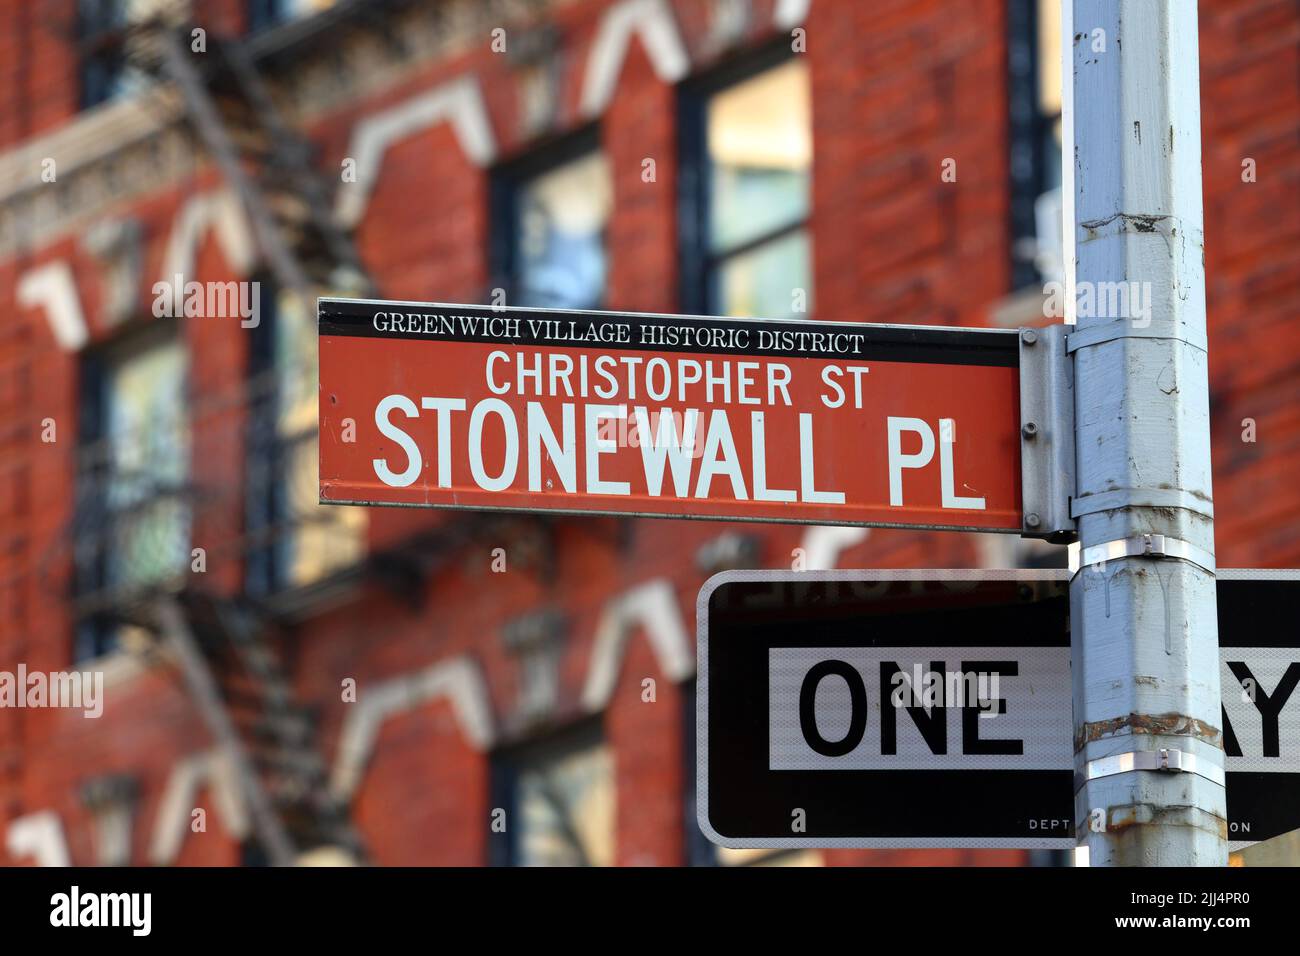 Christopher Street, Stonewall Place street sign in Greenwich Village Historic District in Manhattan, New York. Christopher St, Stonewall Pl. Stock Photo